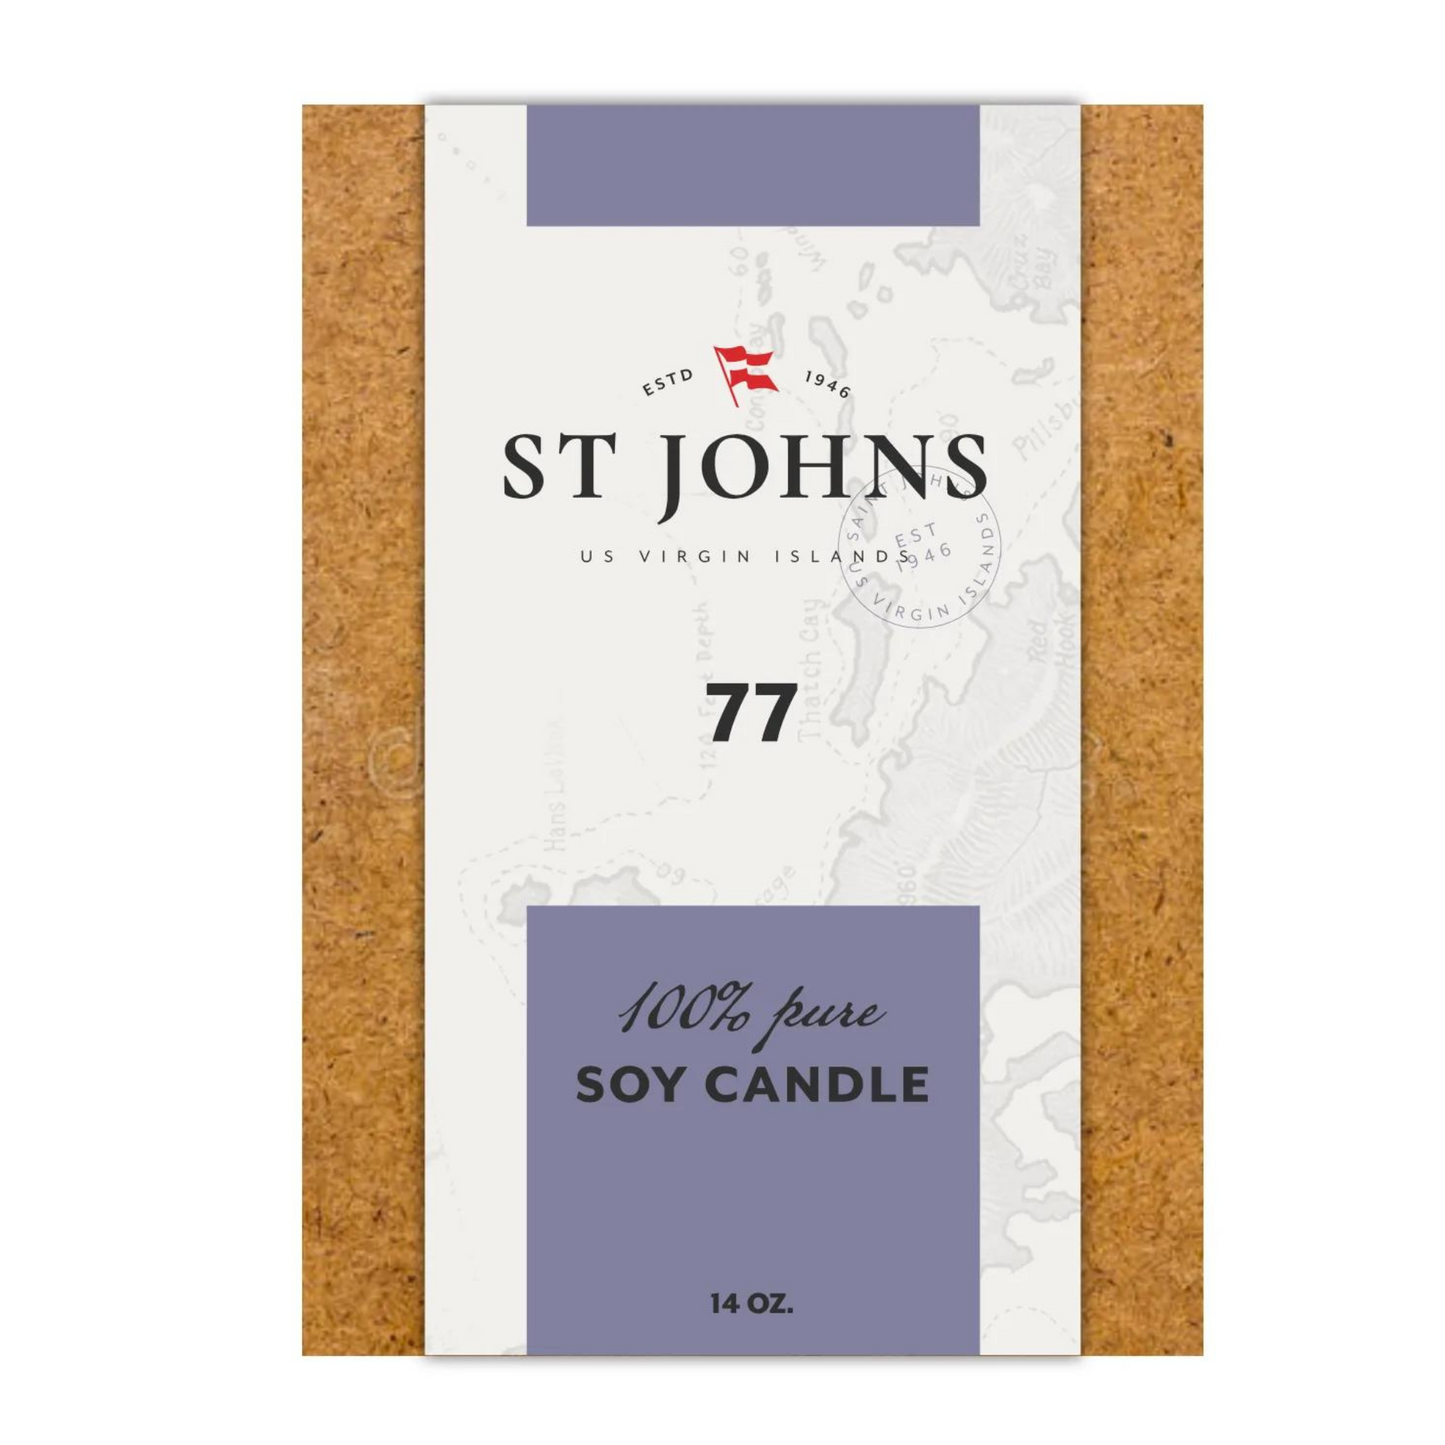 Primary Image of St. Johns 77 Candle (14 oz)